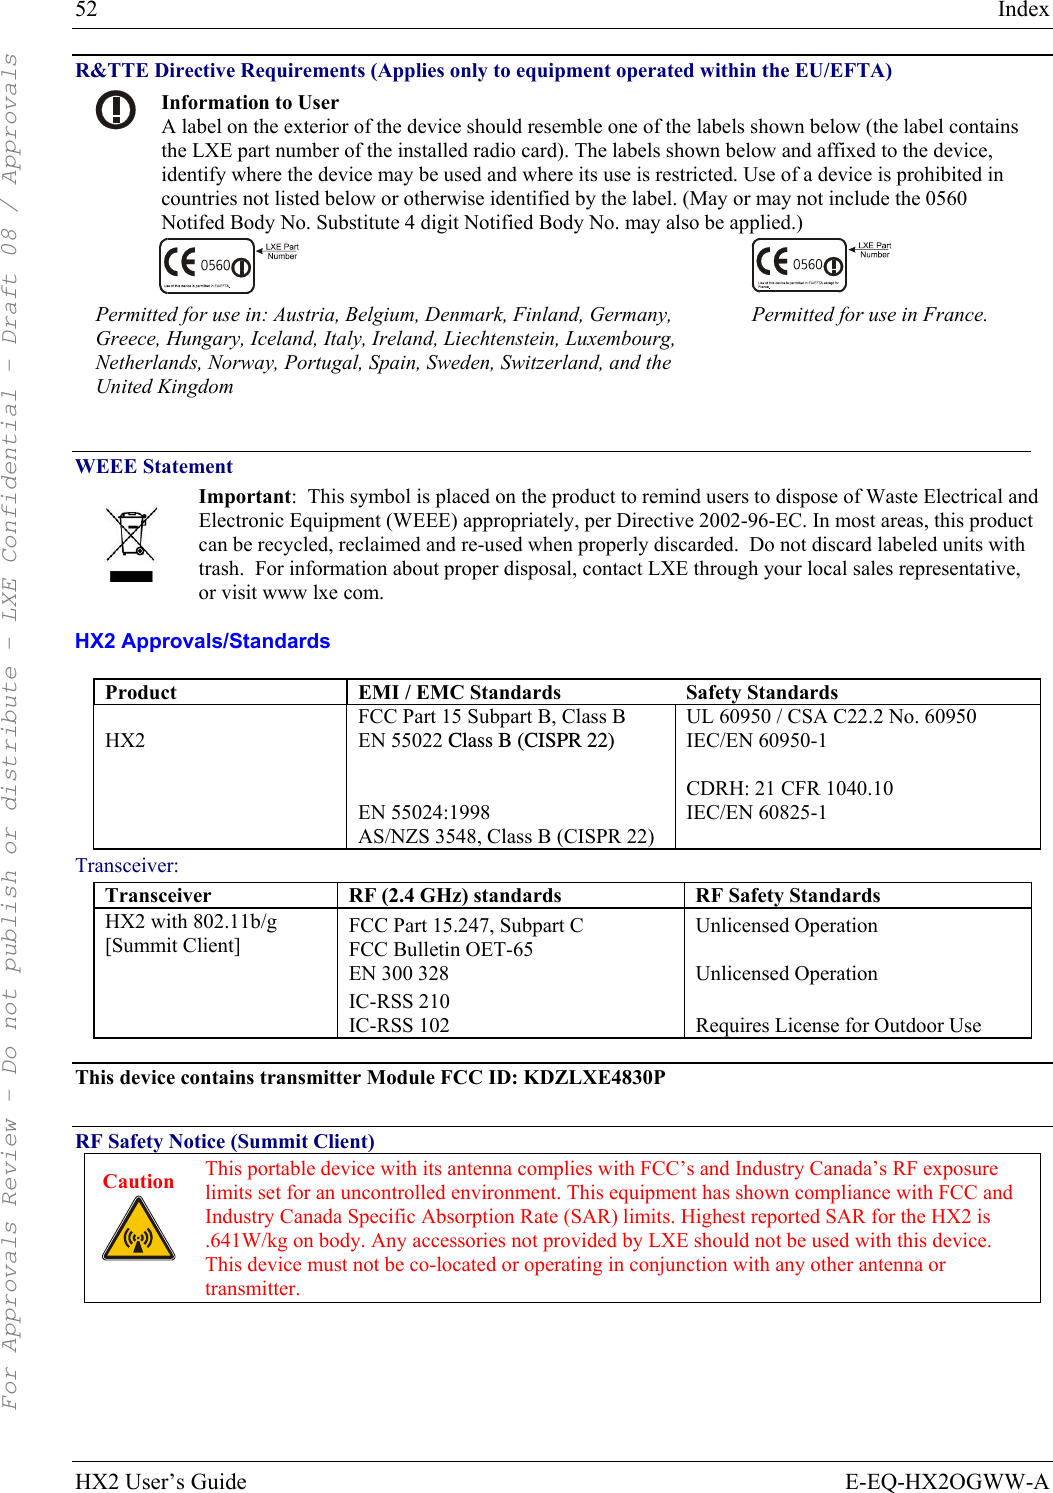 52  Index HX2 User’s Guide  E-EQ-HX2OGWW-A R&amp;TTE Directive Requirements (Applies only to equipment operated within the EU/EFTA)  Information to User A label on the exterior of the device should resemble one of the labels shown below (the label contains the LXE part number of the installed radio card). The labels shown below and affixed to the device, identify where the device may be used and where its use is restricted. Use of a device is prohibited in countries not listed below or otherwise identified by the label. (May or may not include the 0560 Notifed Body No. Substitute 4 digit Notified Body No. may also be applied.)   Permitted for use in: Austria, Belgium, Denmark, Finland, Germany, Greece, Hungary, Iceland, Italy, Ireland, Liechtenstein, Luxembourg, Netherlands, Norway, Portugal, Spain, Sweden, Switzerland, and the United Kingdom Permitted for use in France.  WEEE Statement  Important:  This symbol is placed on the product to remind users to dispose of Waste Electrical and Electronic Equipment (WEEE) appropriately, per Directive 2002-96-EC. In most areas, this product can be recycled, reclaimed and re-used when properly discarded.  Do not discard labeled units with trash.  For information about proper disposal, contact LXE through your local sales representative, or visit www lxe com. HX2 Approvals/Standards Product  EMI / EMC Standards   Safety Standards  HX2 FCC Part 15 Subpart B, Class B EN 55022 Class B (CISPR 22)  EN 55024:1998 AS/NZS 3548, Class B (CISPR 22) UL 60950 / CSA C22.2 No. 60950 IEC/EN 60950-1  CDRH: 21 CFR 1040.10 IEC/EN 60825-1 Transceiver: Transceiver  RF (2.4 GHz) standards  RF Safety Standards HX2 with 802.11b/g [Summit Client] FCC Part 15.247, Subpart C FCC Bulletin OET-65 EN 300 328 IC-RSS 210 IC-RSS 102 Unlicensed Operation  Unlicensed Operation  Requires License for Outdoor Use  This device contains transmitter Module FCC ID: KDZLXE4830P  RF Safety Notice (Summit Client) Caution   This portable device with its antenna complies with FCC’s and Industry Canada’s RF exposure limits set for an uncontrolled environment. This equipment has shown compliance with FCC and Industry Canada Specific Absorption Rate (SAR) limits. Highest reported SAR for the HX2 is .641W/kg on body. Any accessories not provided by LXE should not be used with this device. This device must not be co-located or operating in conjunction with any other antenna or transmitter.     For Approvals Review - Do not publish or distribute - LXE Confidential - Draft 08 / Approvals